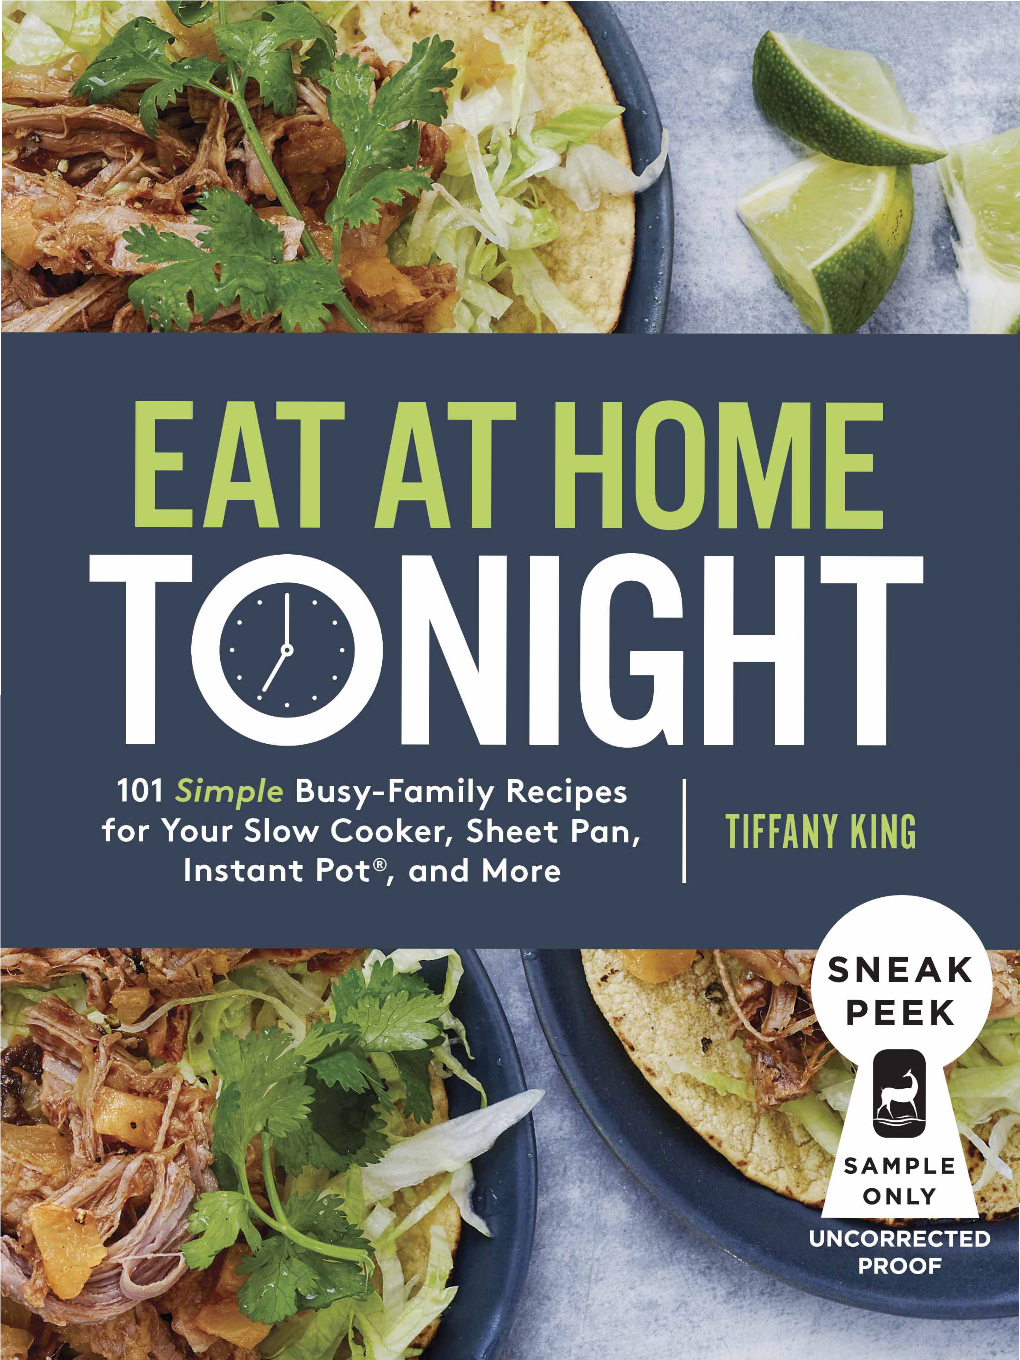 Read the First Few Pages in Eat at Home Tonight